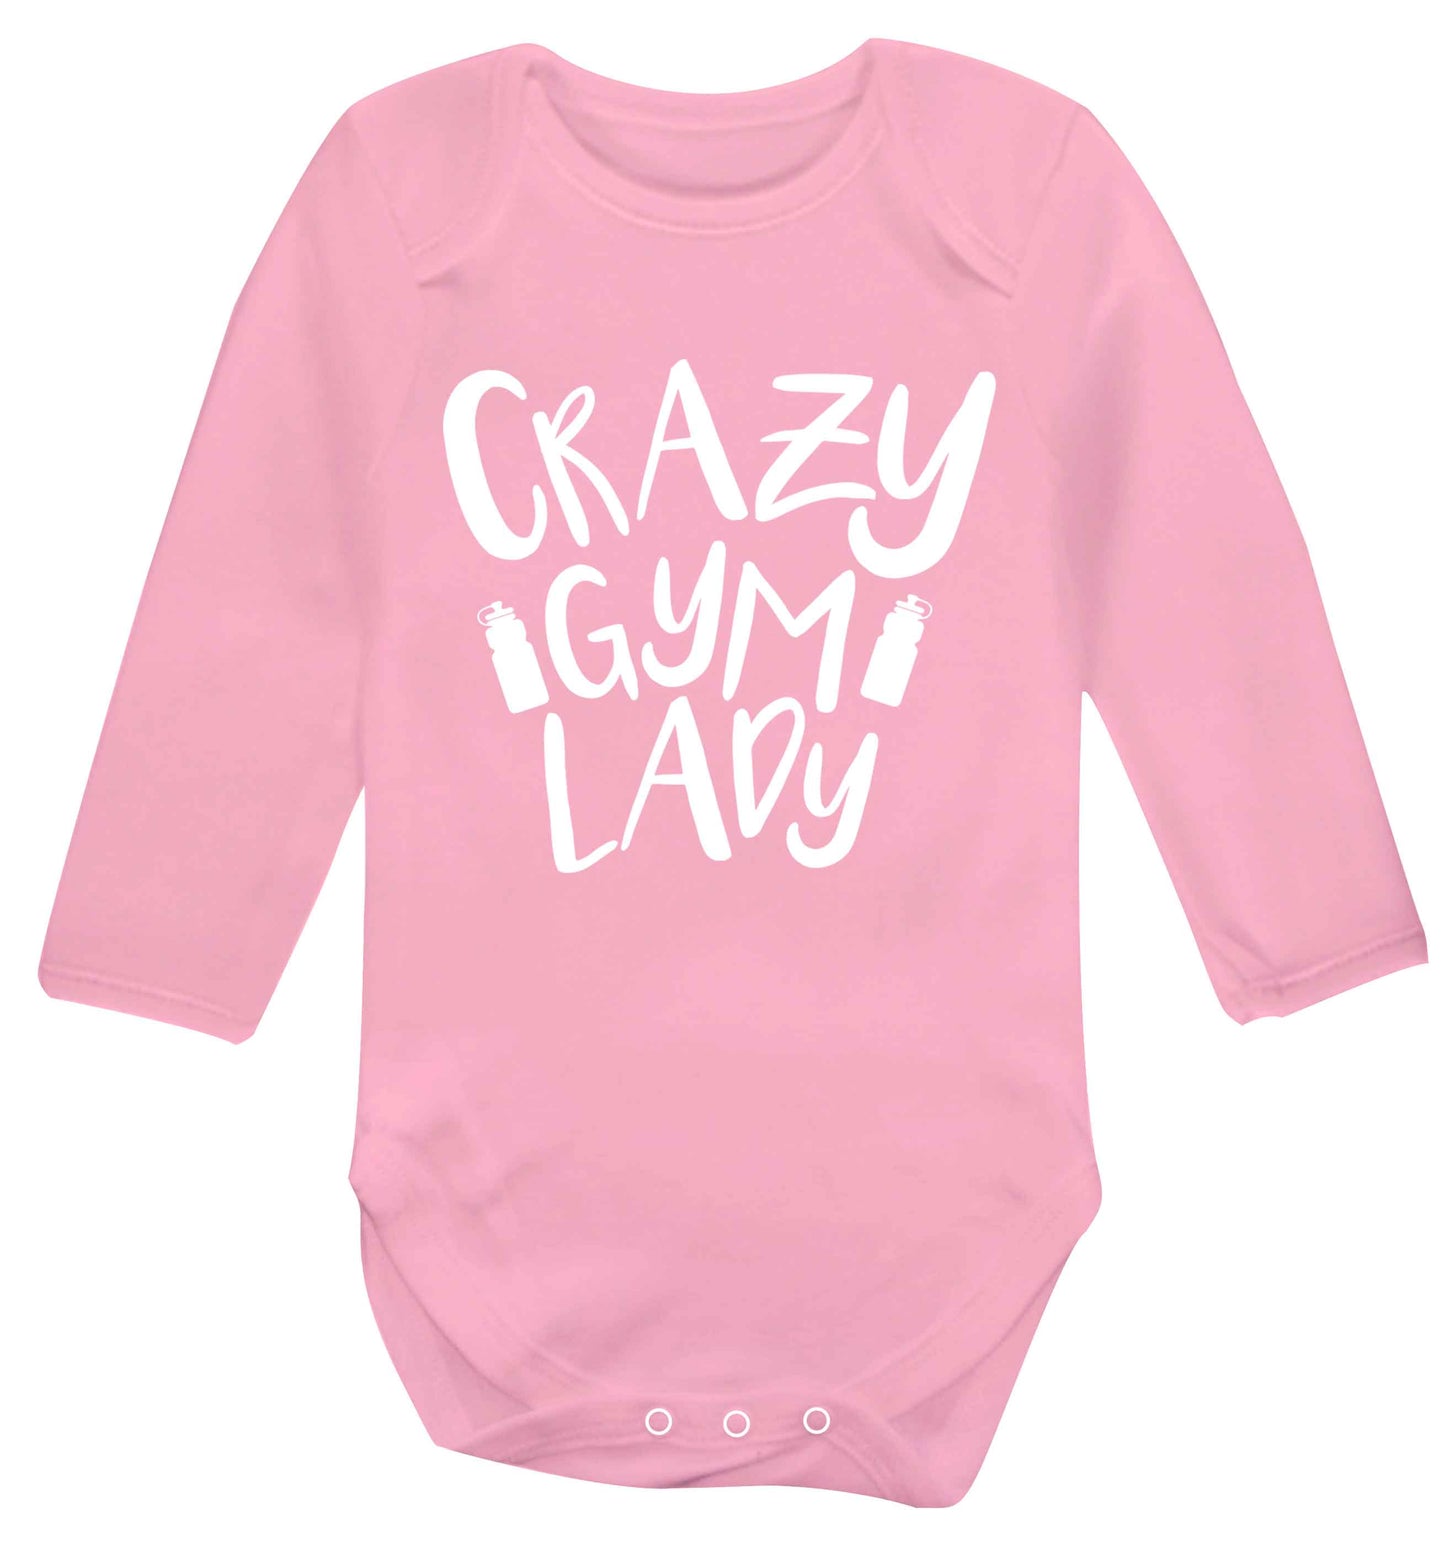 Crazy gym lady Baby Vest long sleeved pale pink 6-12 months